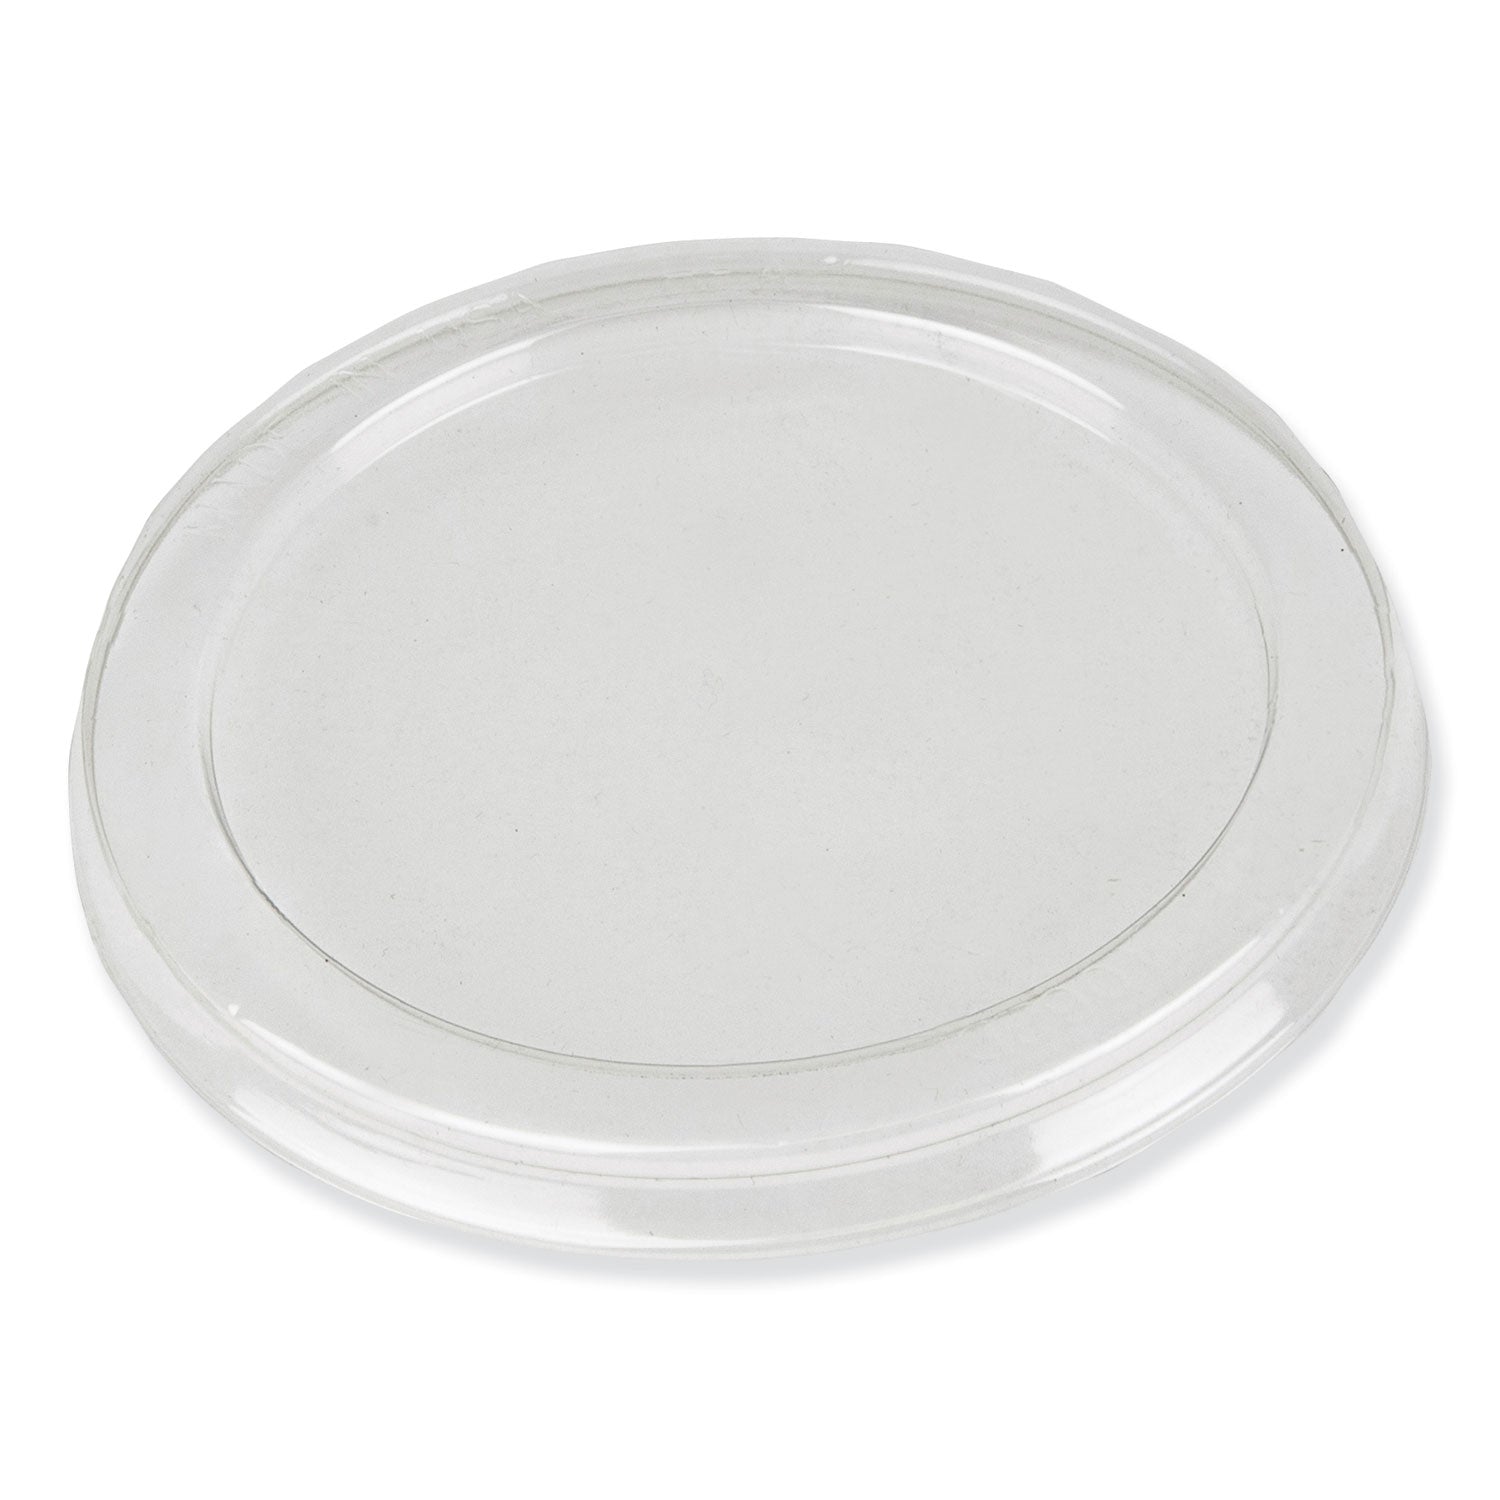 dome-lids-for-325-round-containers-325-diameter-clear-plastic-1000-carton_dpkp14001000 - 1